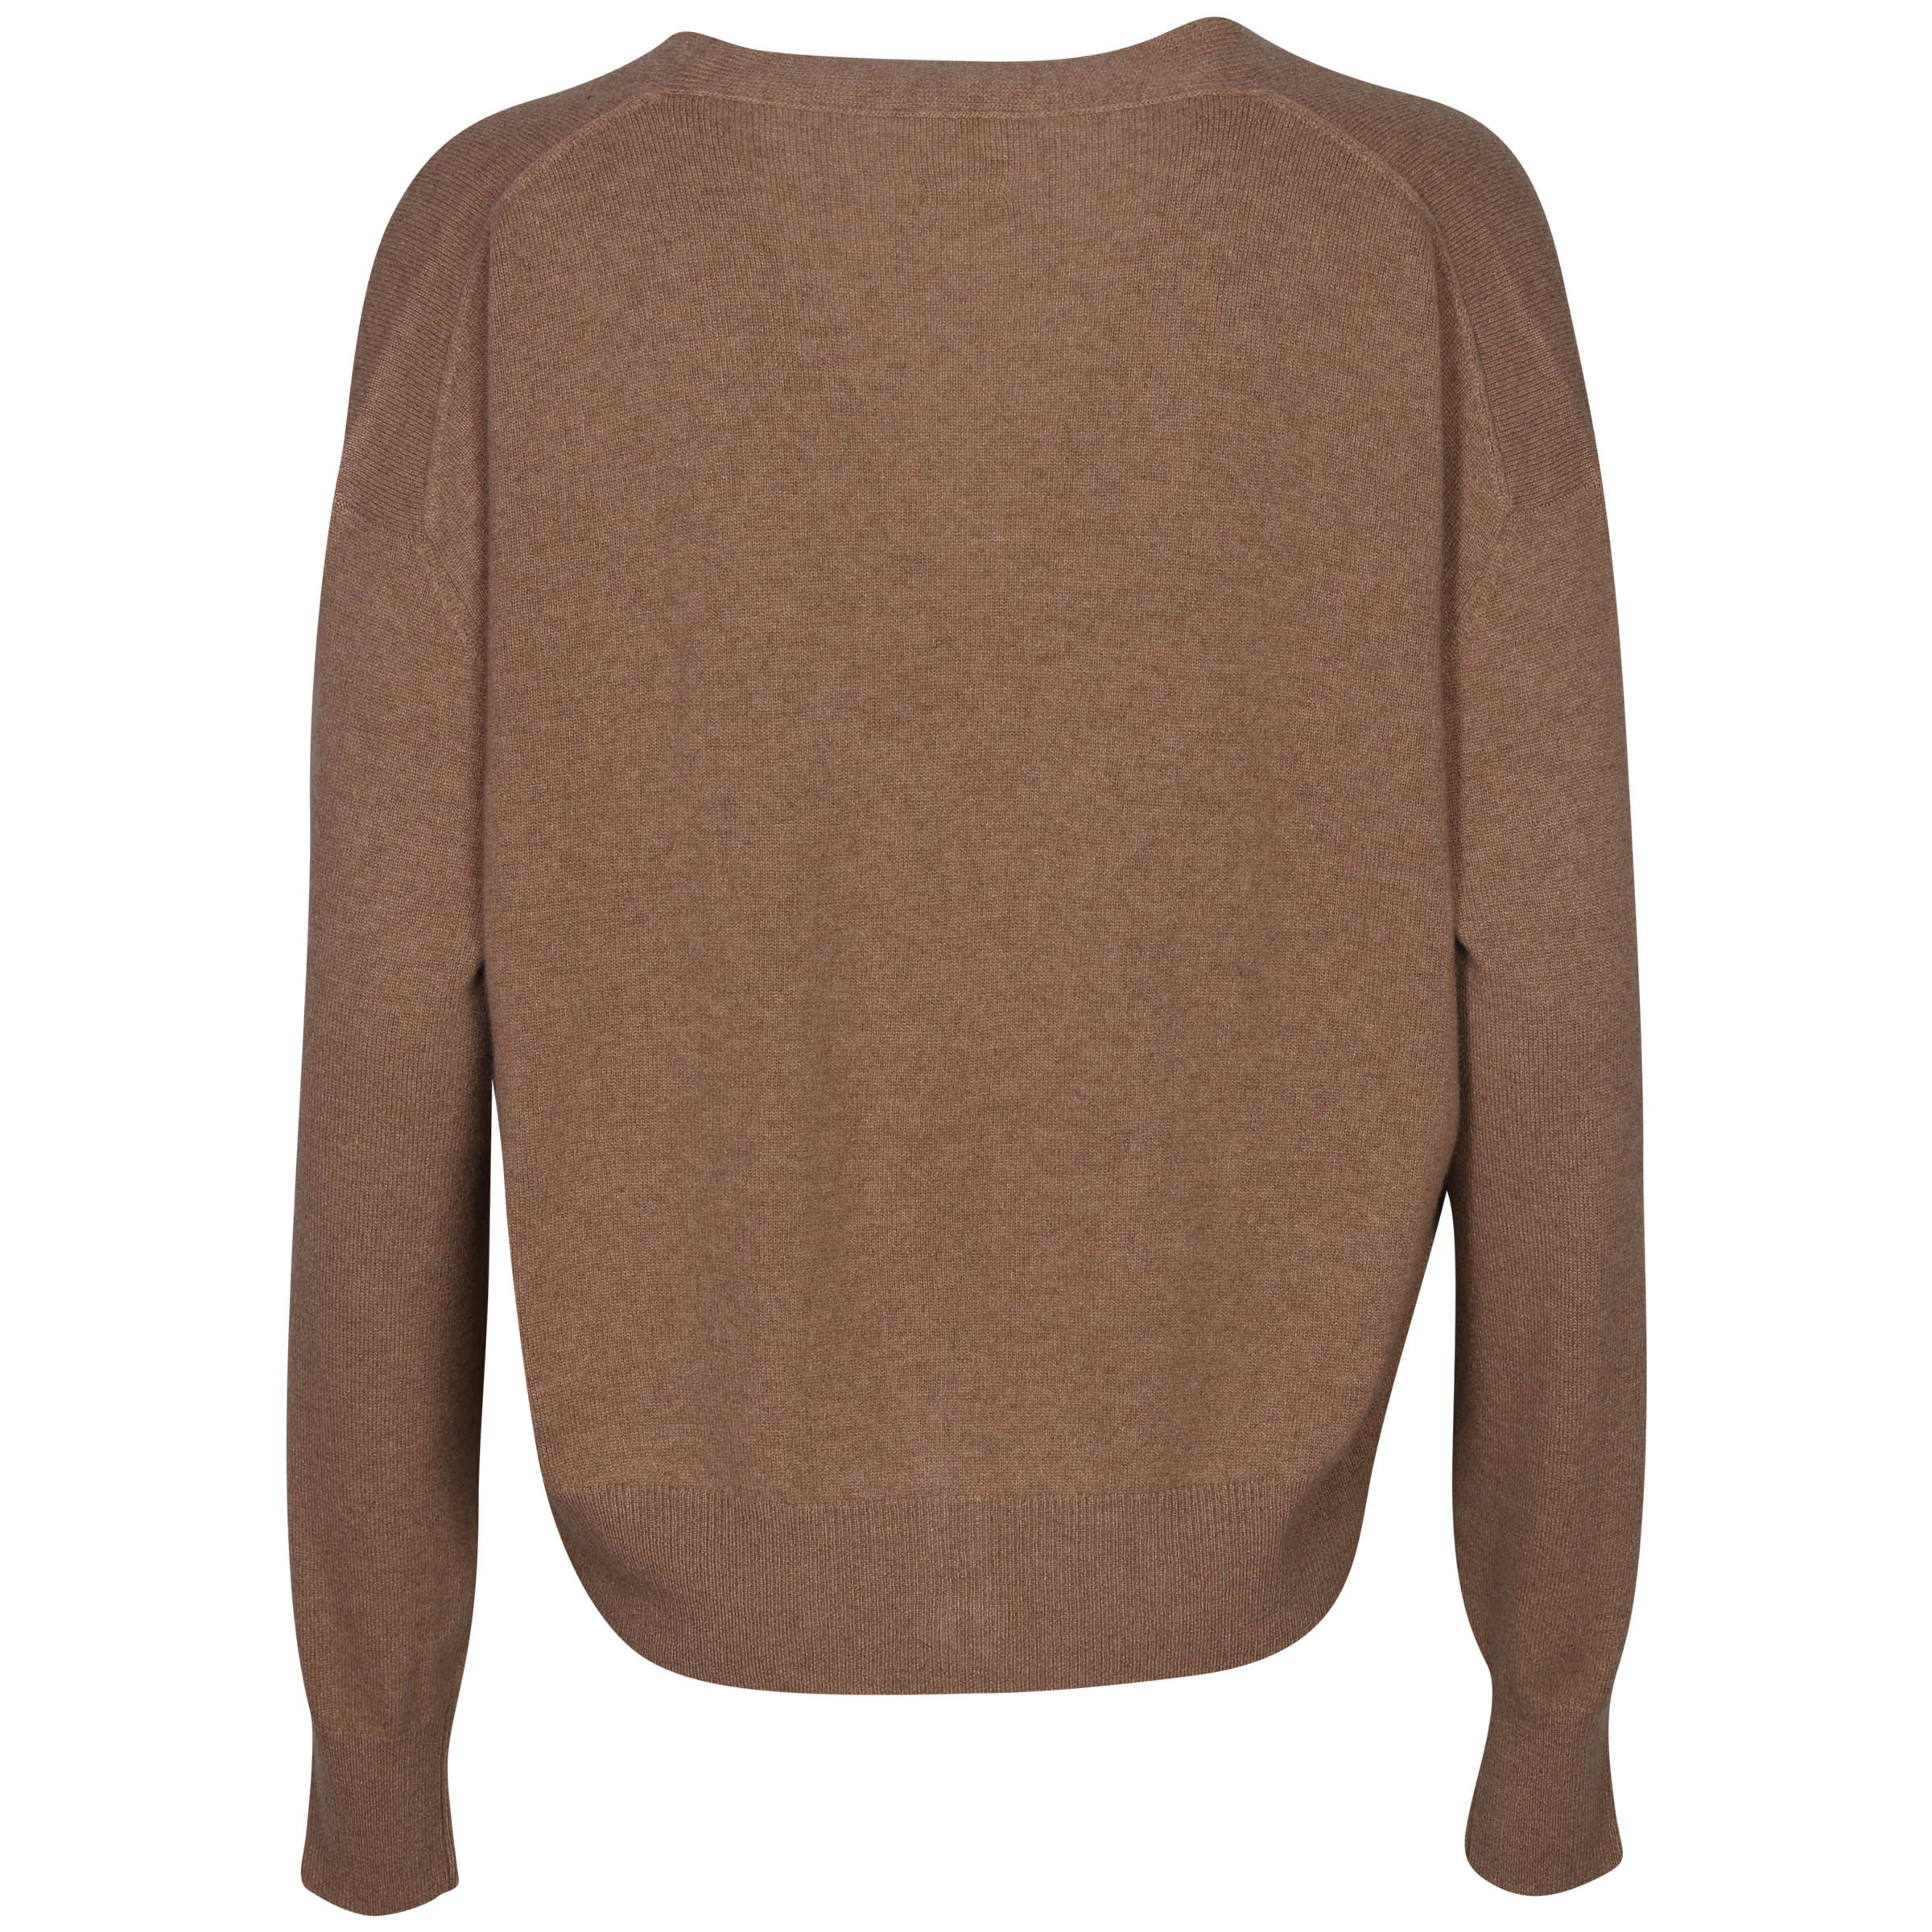 Phiili Recycled Cashmere Cardigan in Camel XS/S